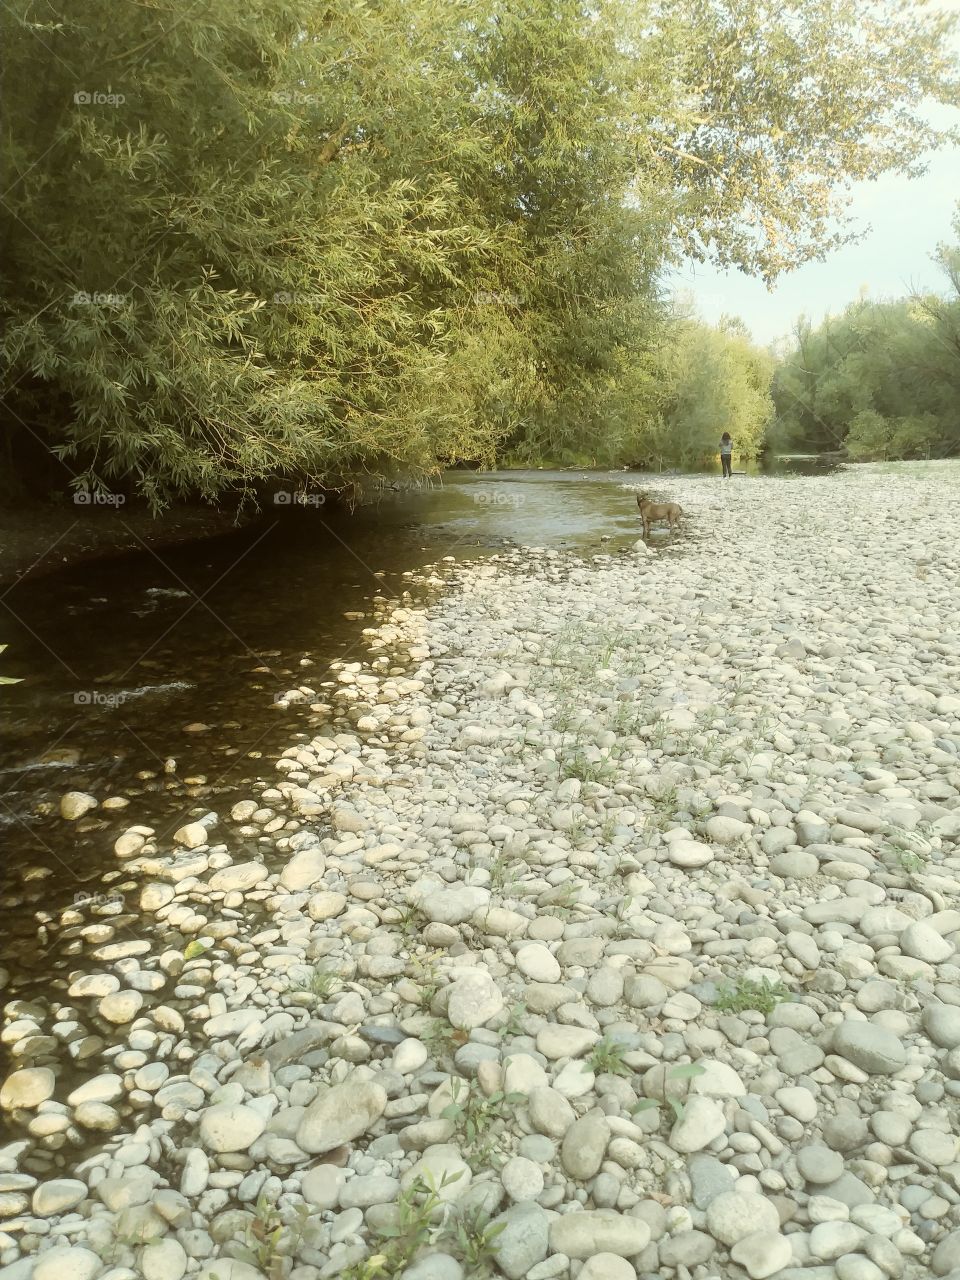 river bed